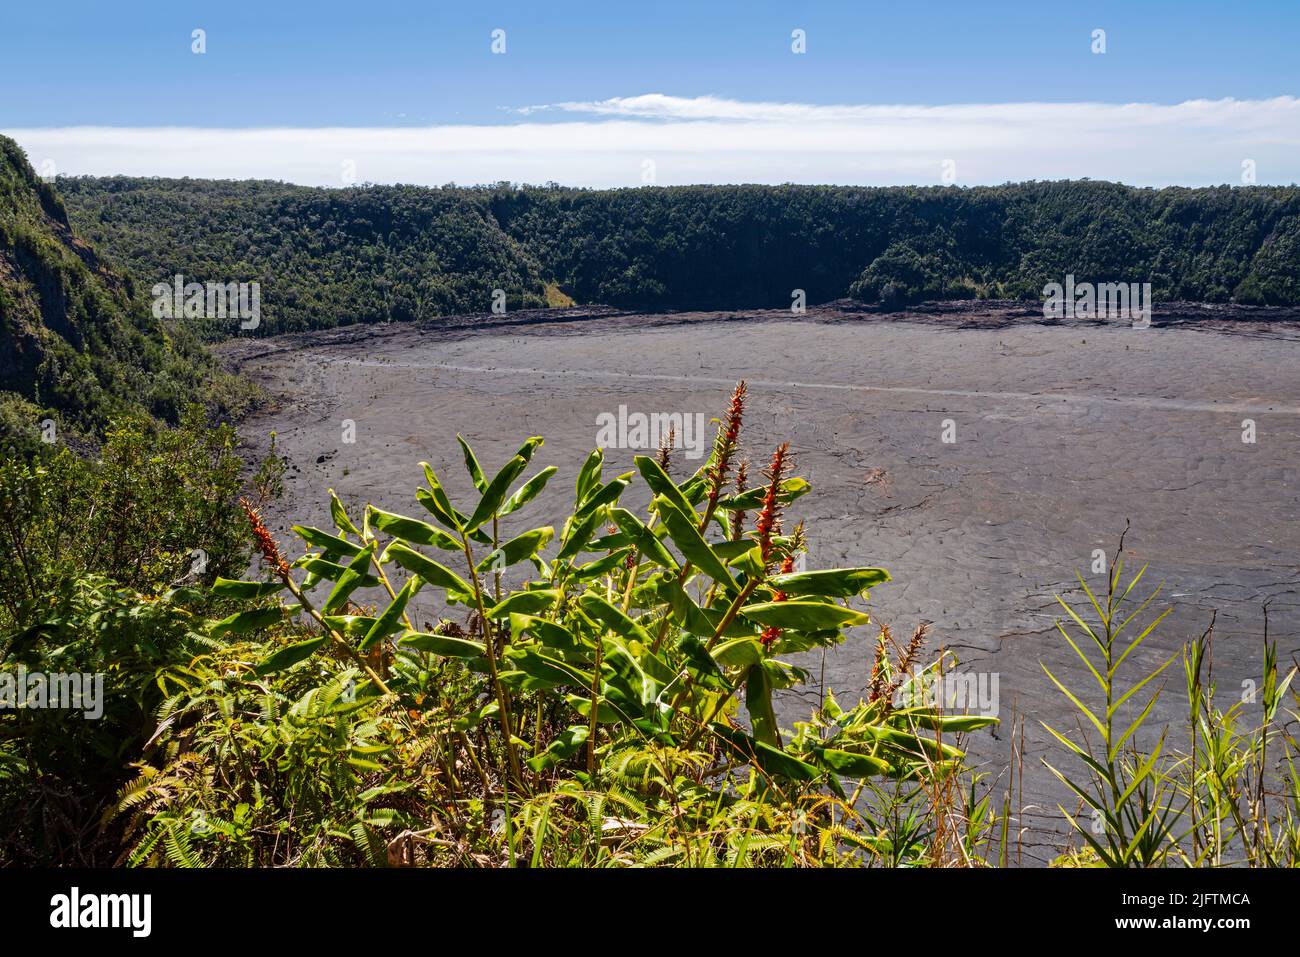 overlooking kilauea iki crater from rim in hawaii volcanoes national park Stock Photo